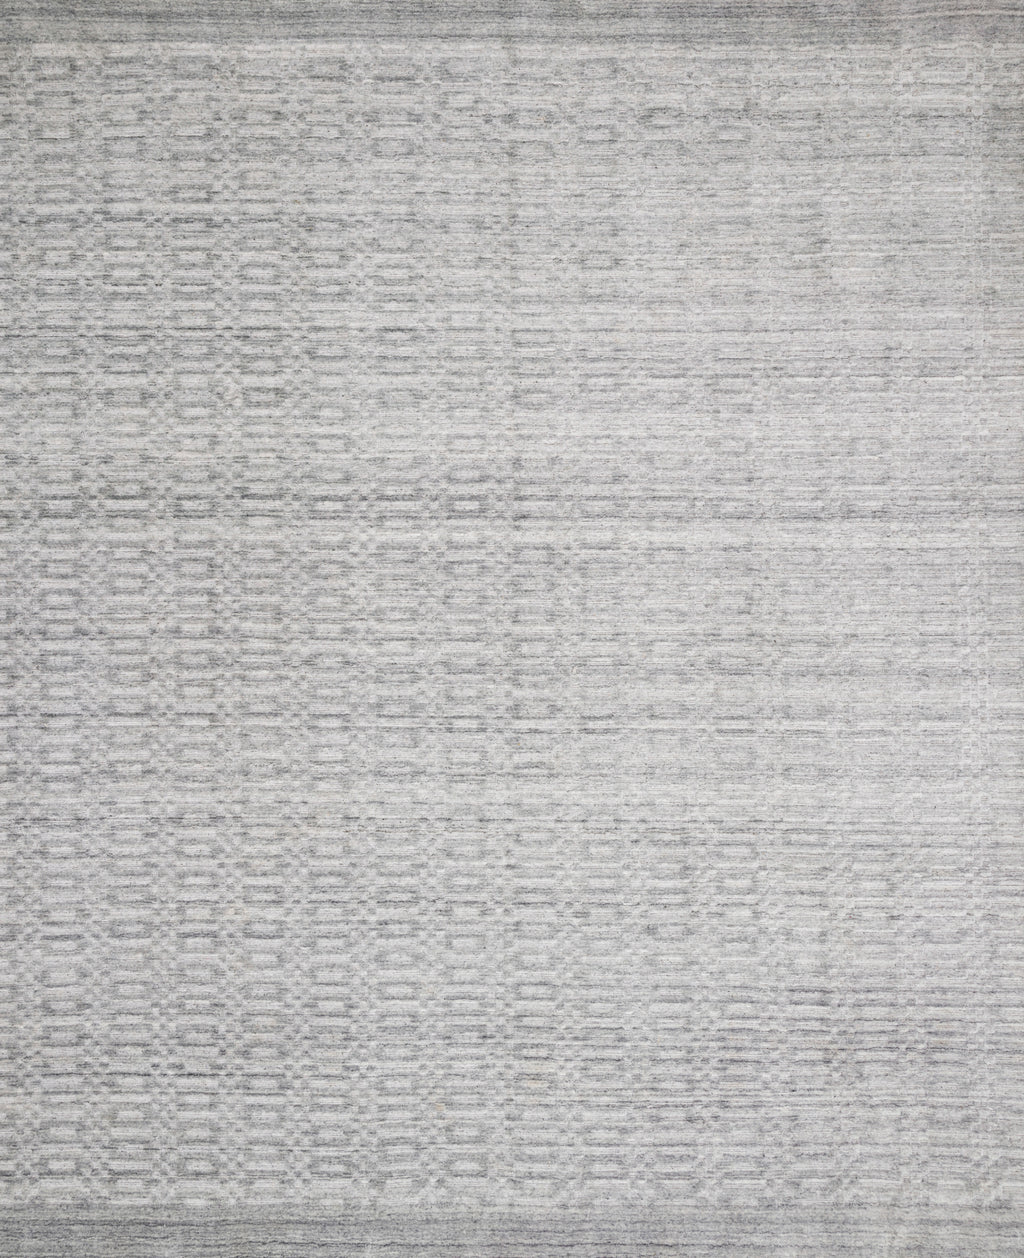 LENNON Collection Wool/Viscose Rug  in  SILVER Gray Accent Hand-Loomed Wool/Viscose